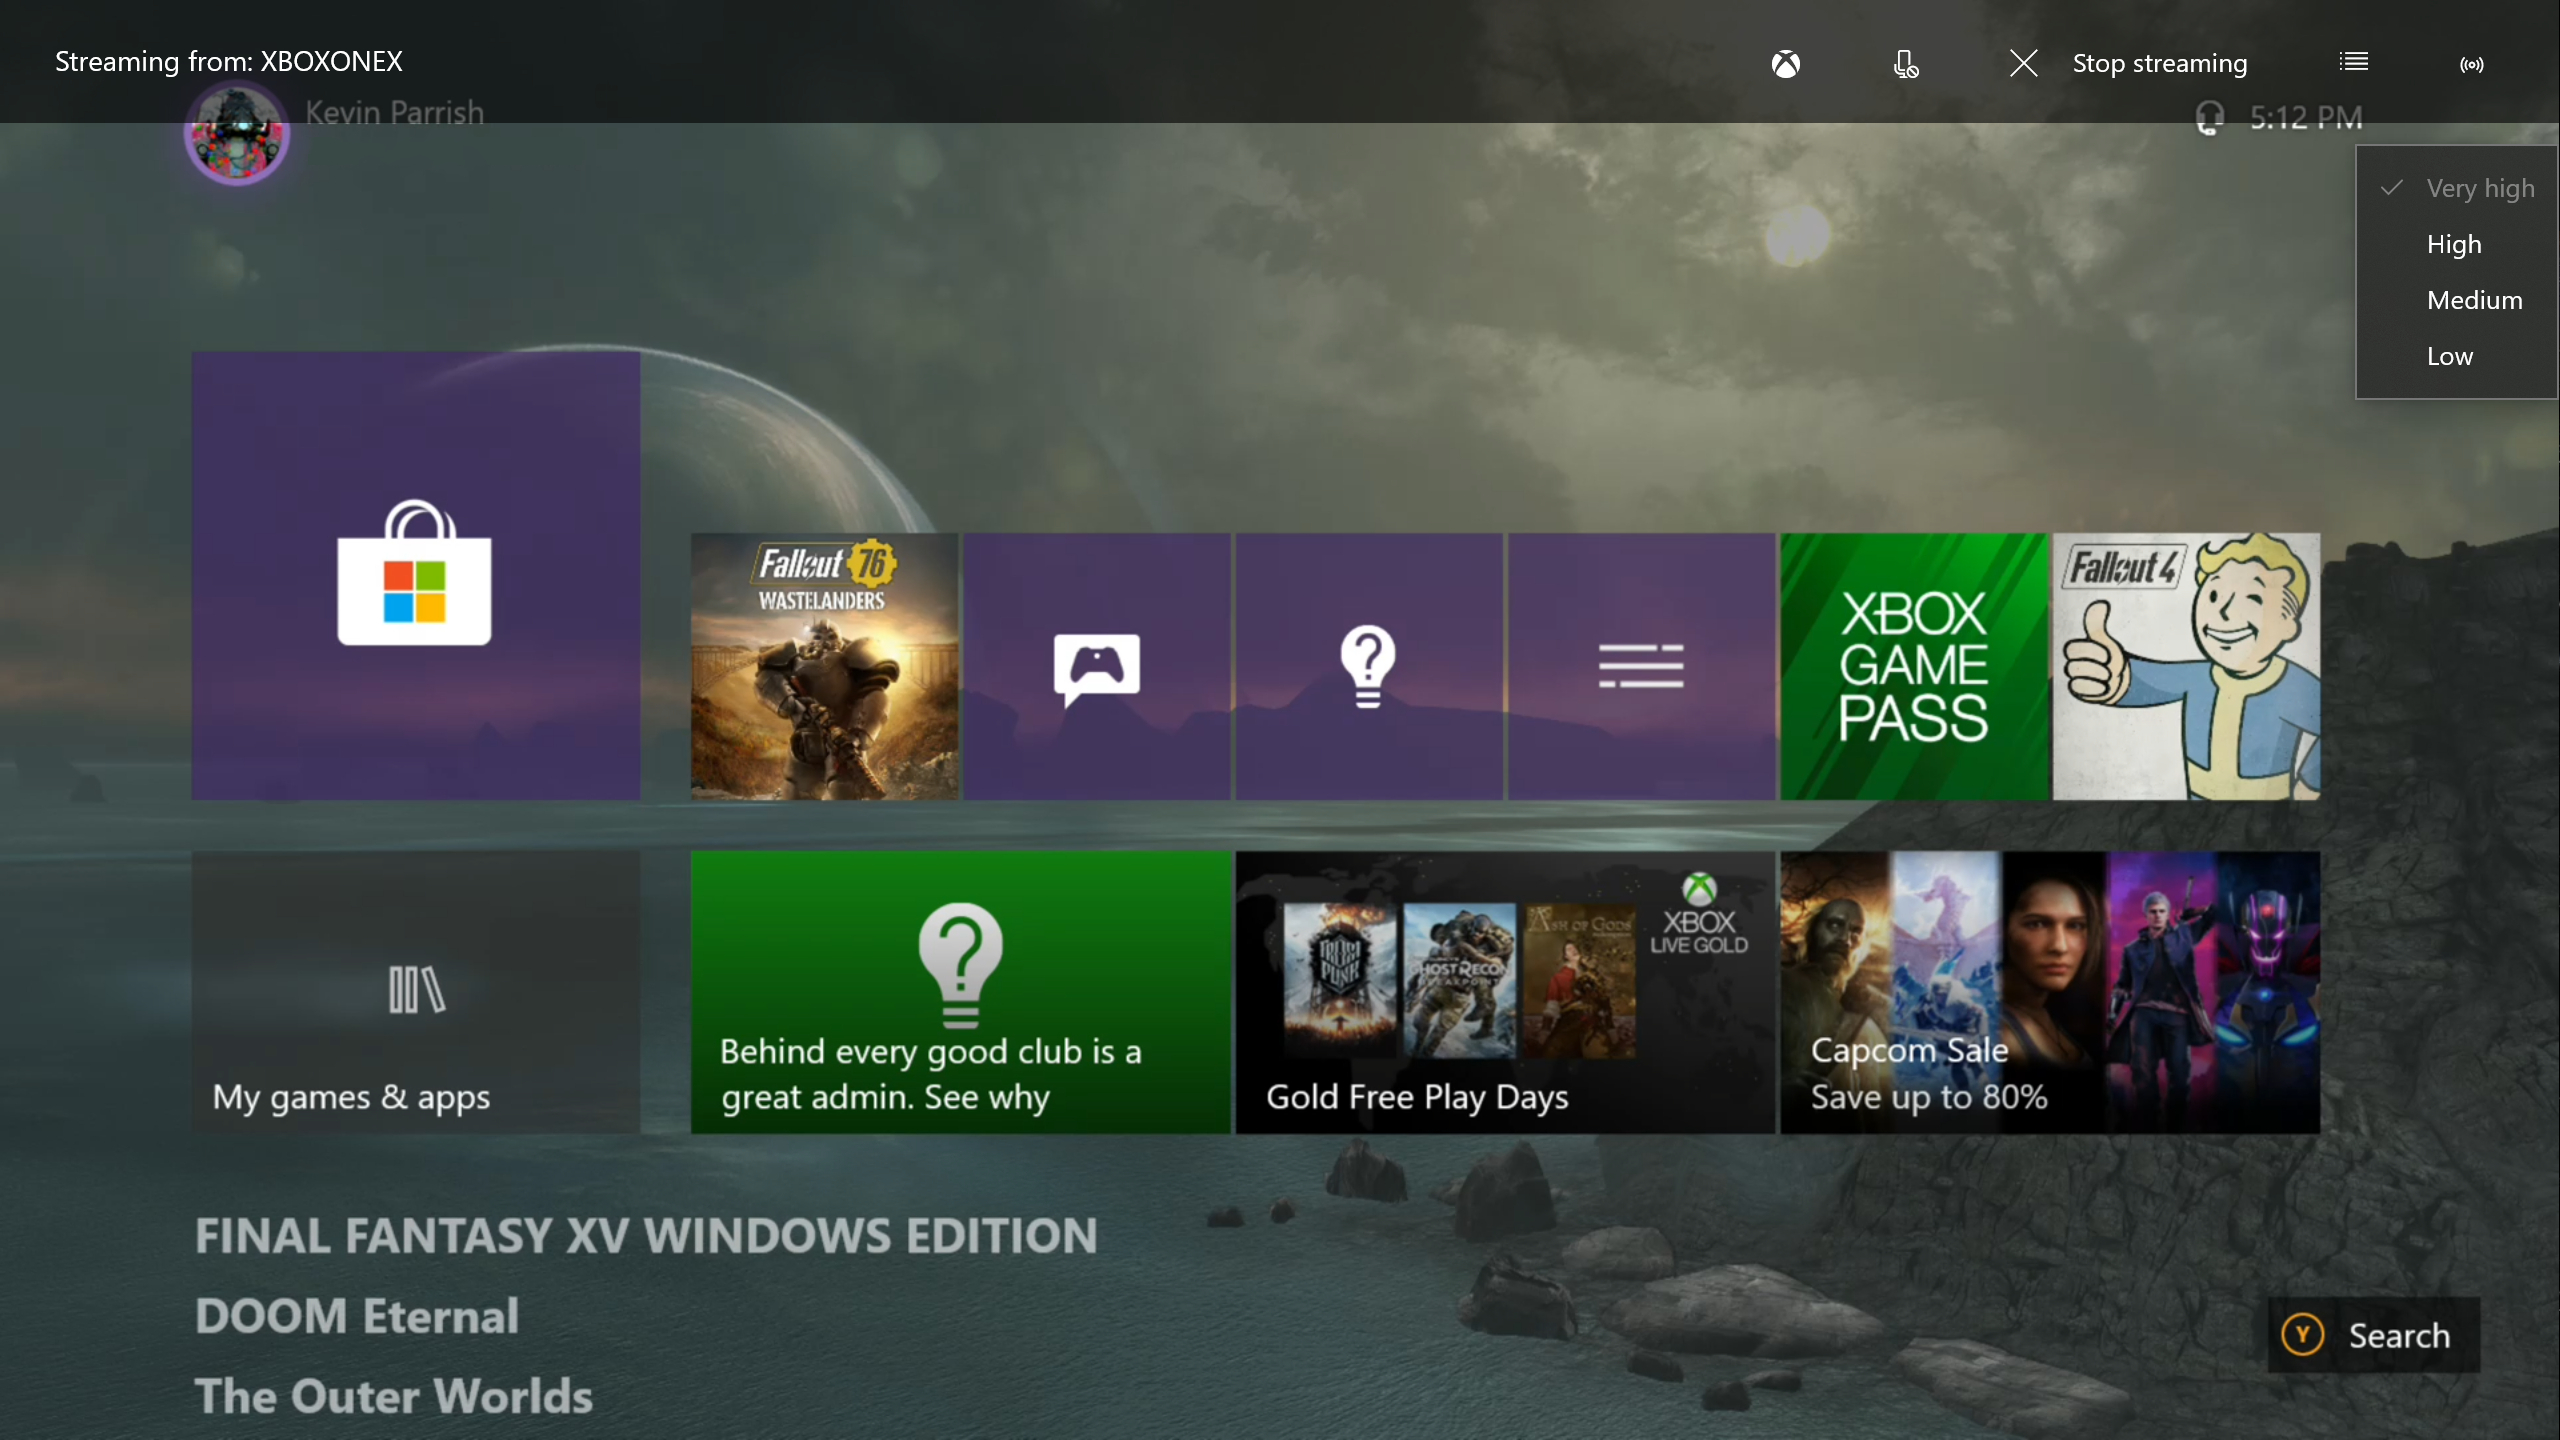 How to play Xbox One games on Windows 10